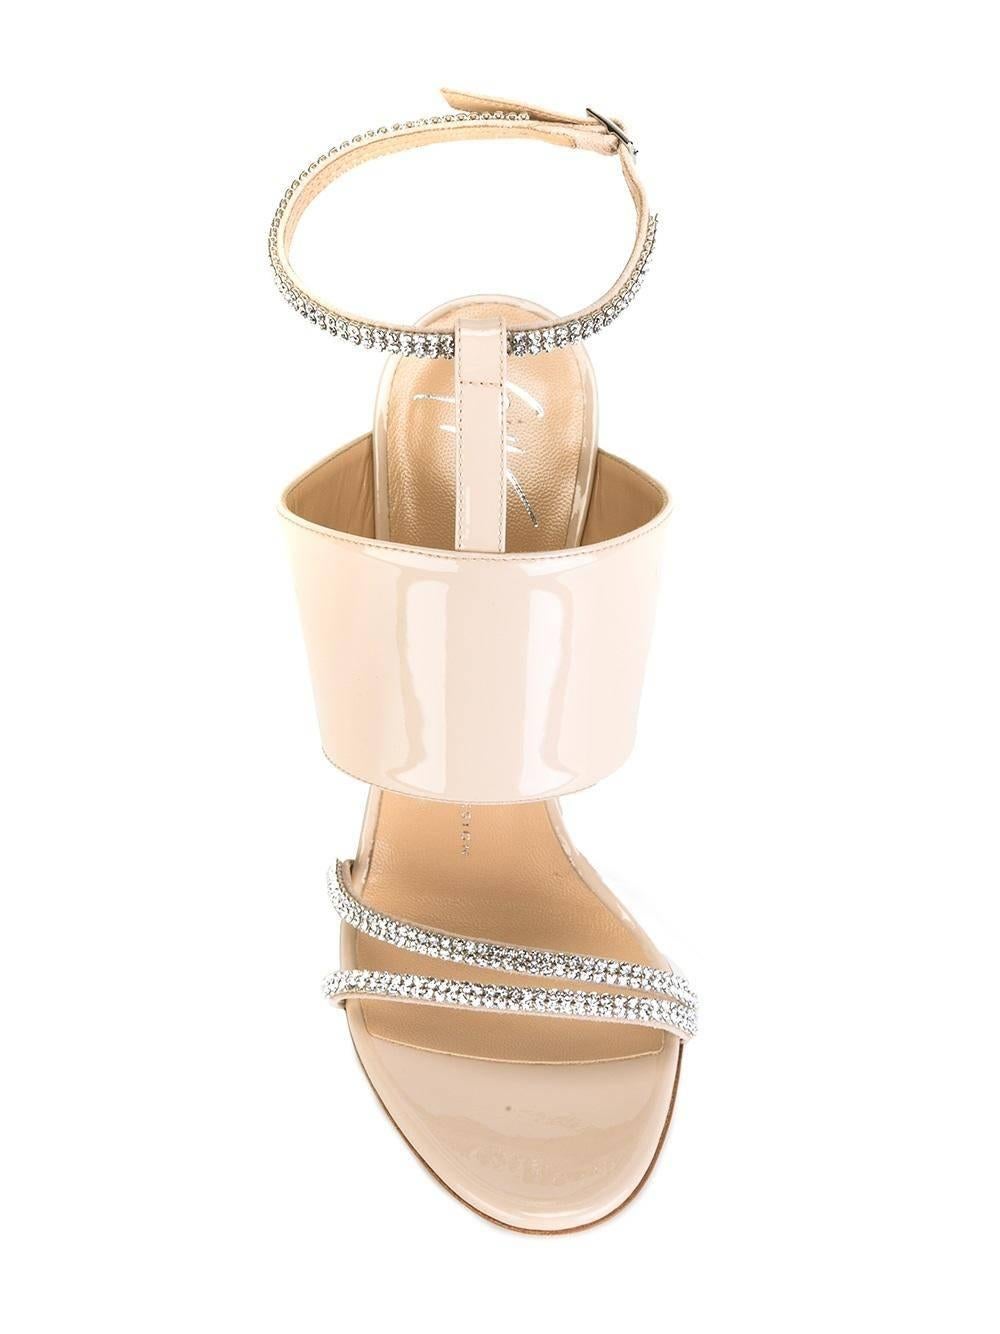 White Giuseppe Zanotti New Nude Patent Leather Crystal Evening Sandals Heels in Box